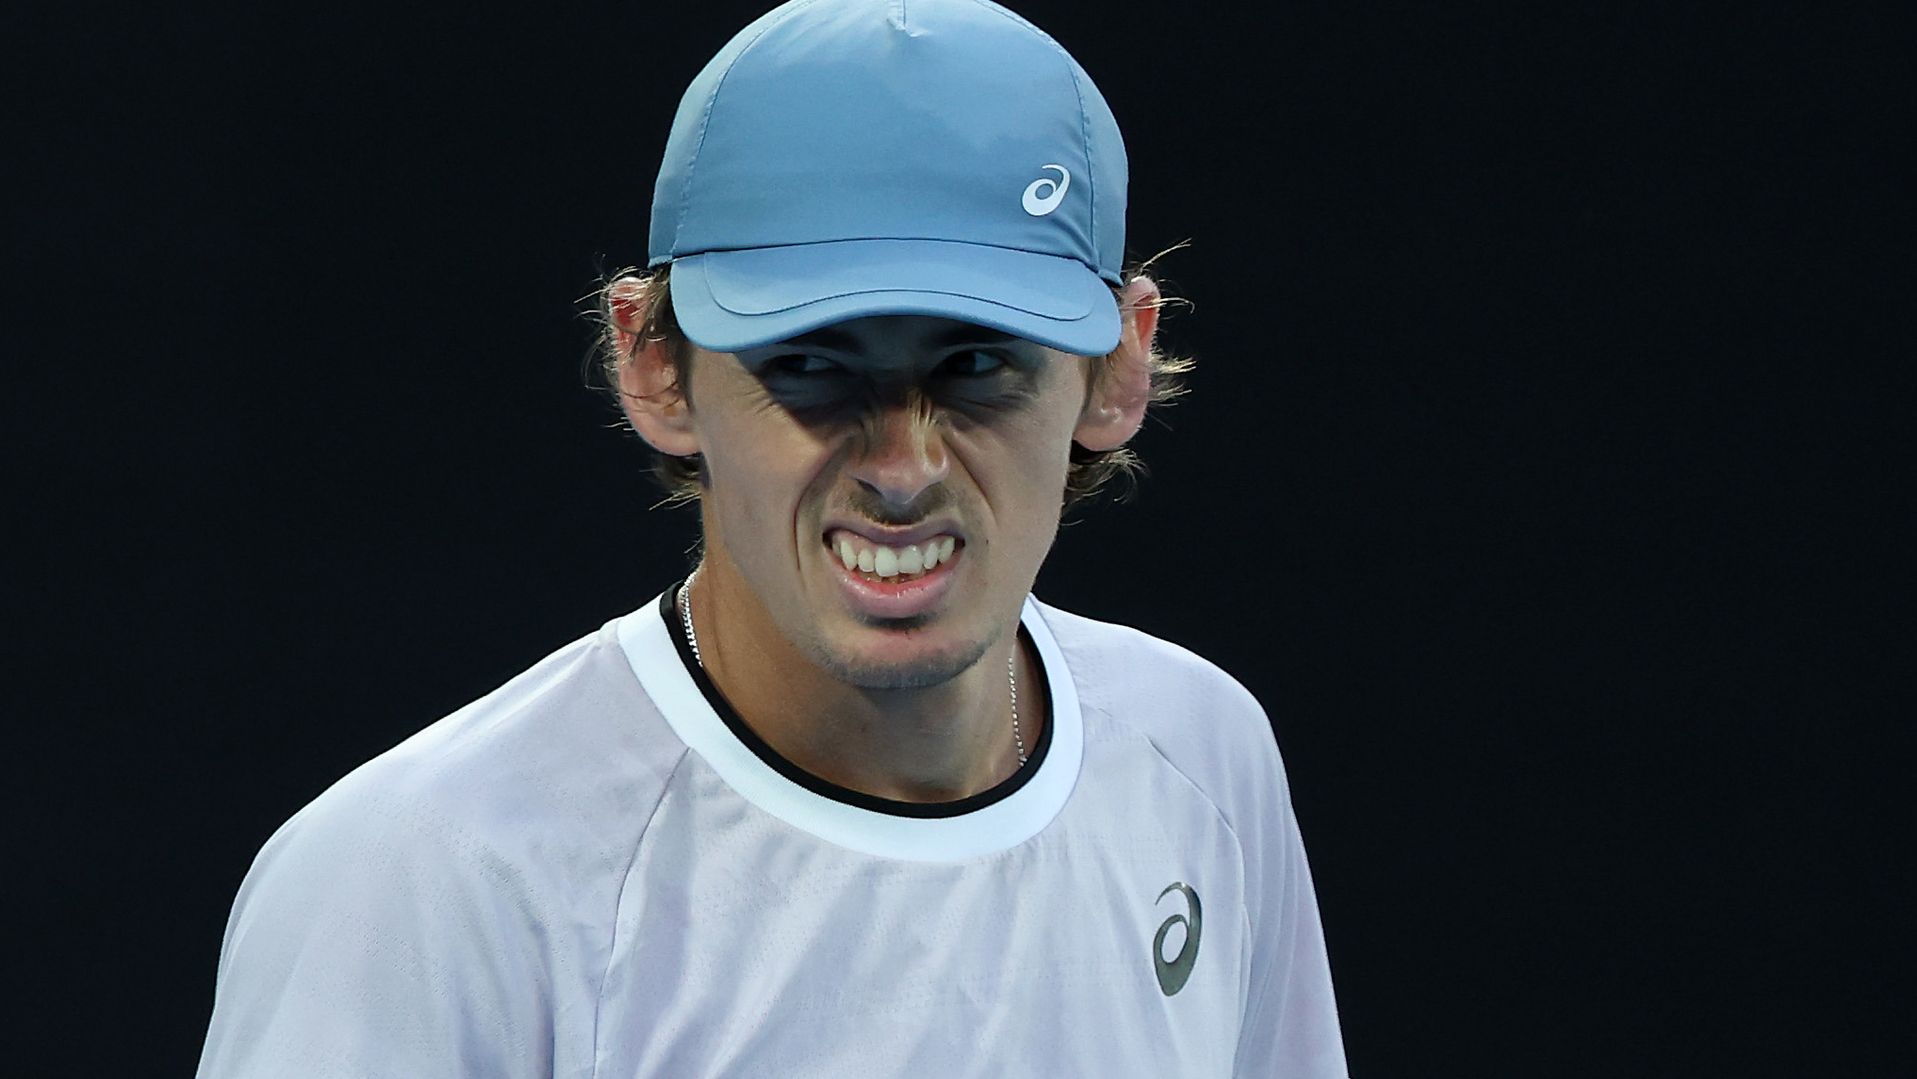 MELBOURNE, AUSTRALIA - JANUARY 23: Alex de Minaur of Australia reacts during the fourth round singles match against Novak Djokovic of Serbia during day eight of the 2023 Australian Open at Melbourne Park on January 23, 2023 in Melbourne, Australia. (Photo by Mark Kolbe/Getty Images)